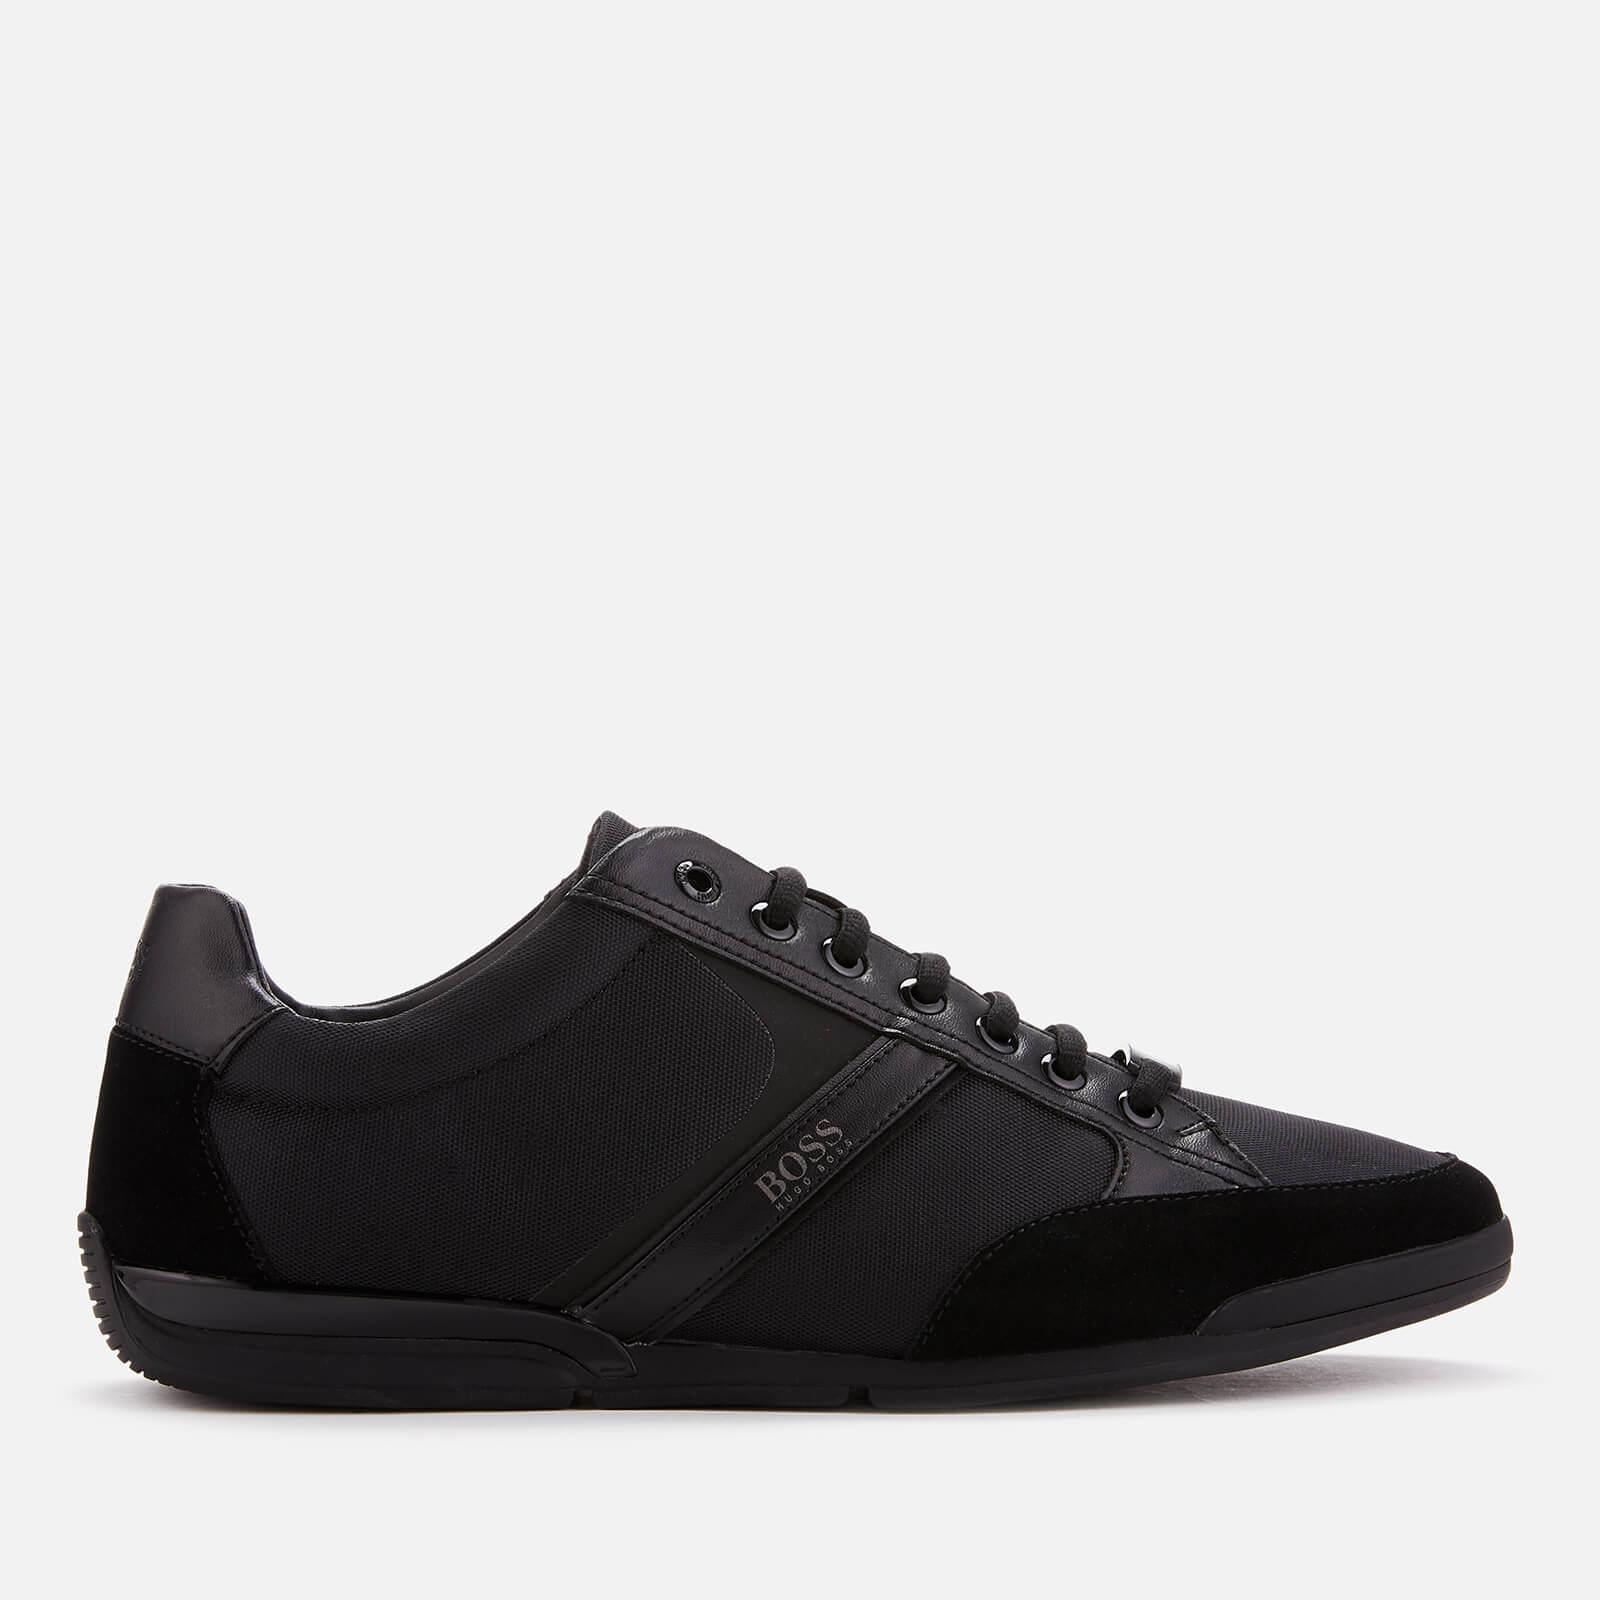 Lyst - BOSS Saturn Low Profile Trainers in Black for Men